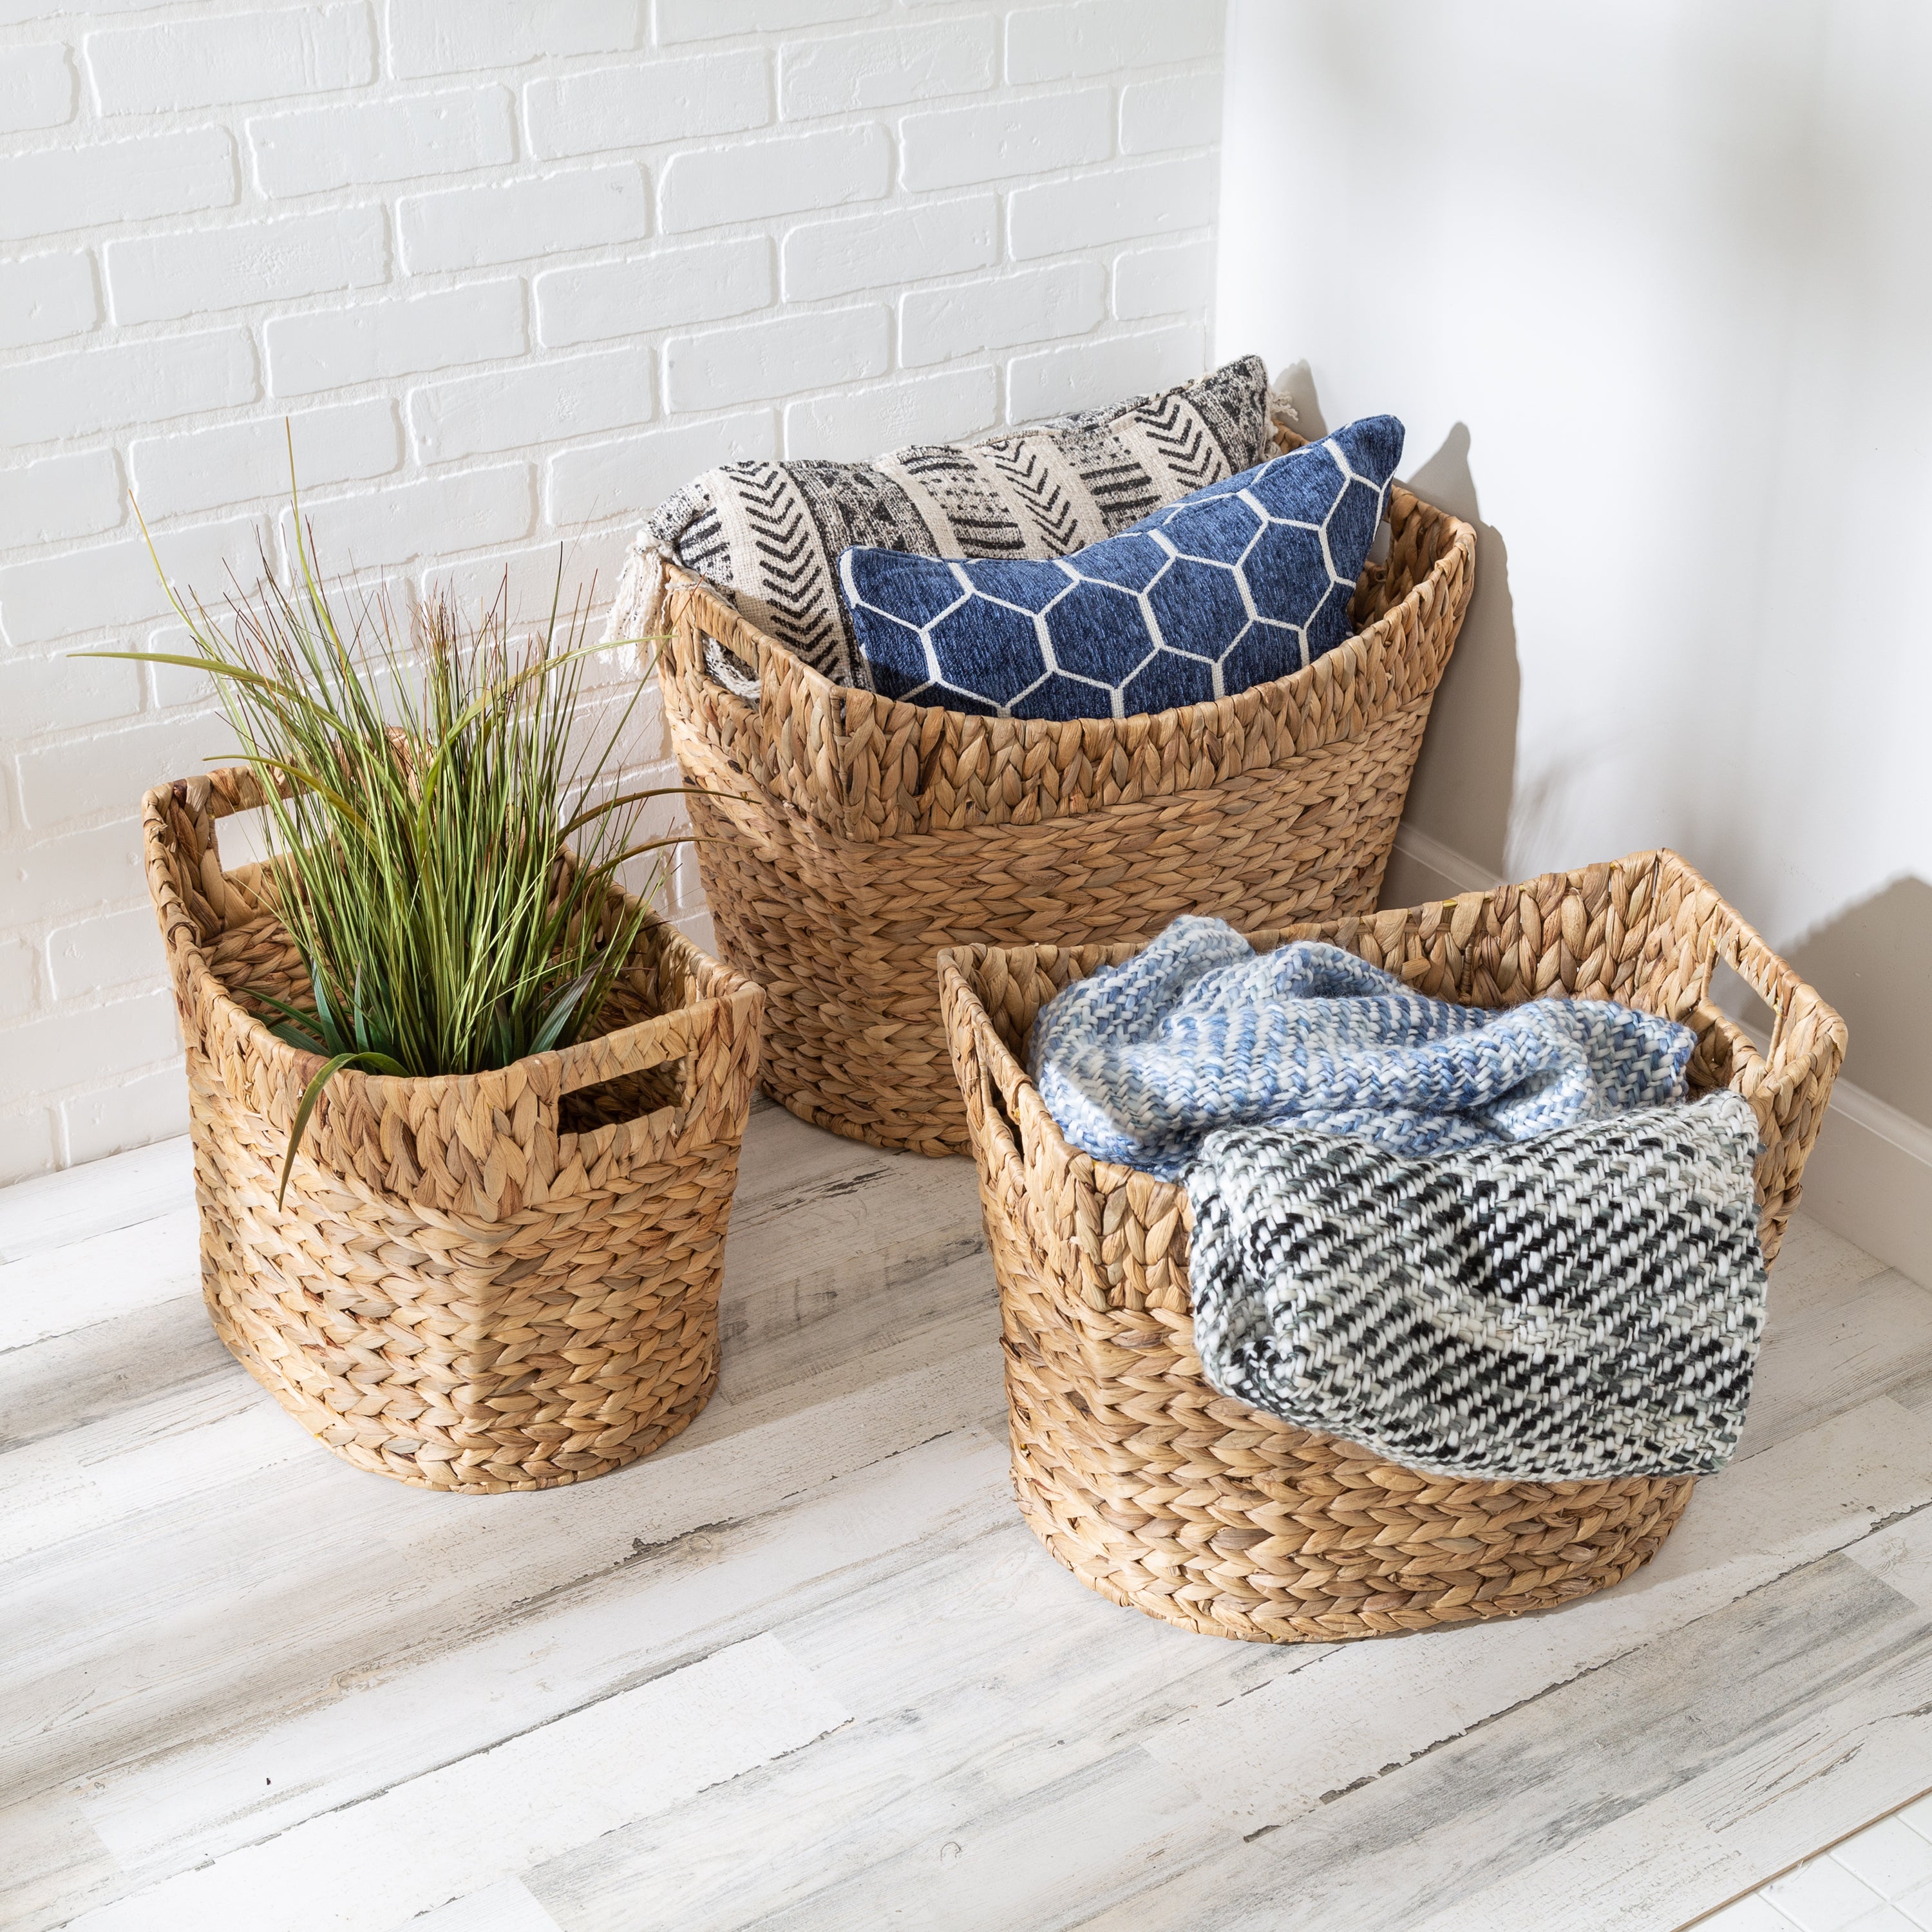 Set of Wicker Baskets for Home Organization, Water Hyacinth